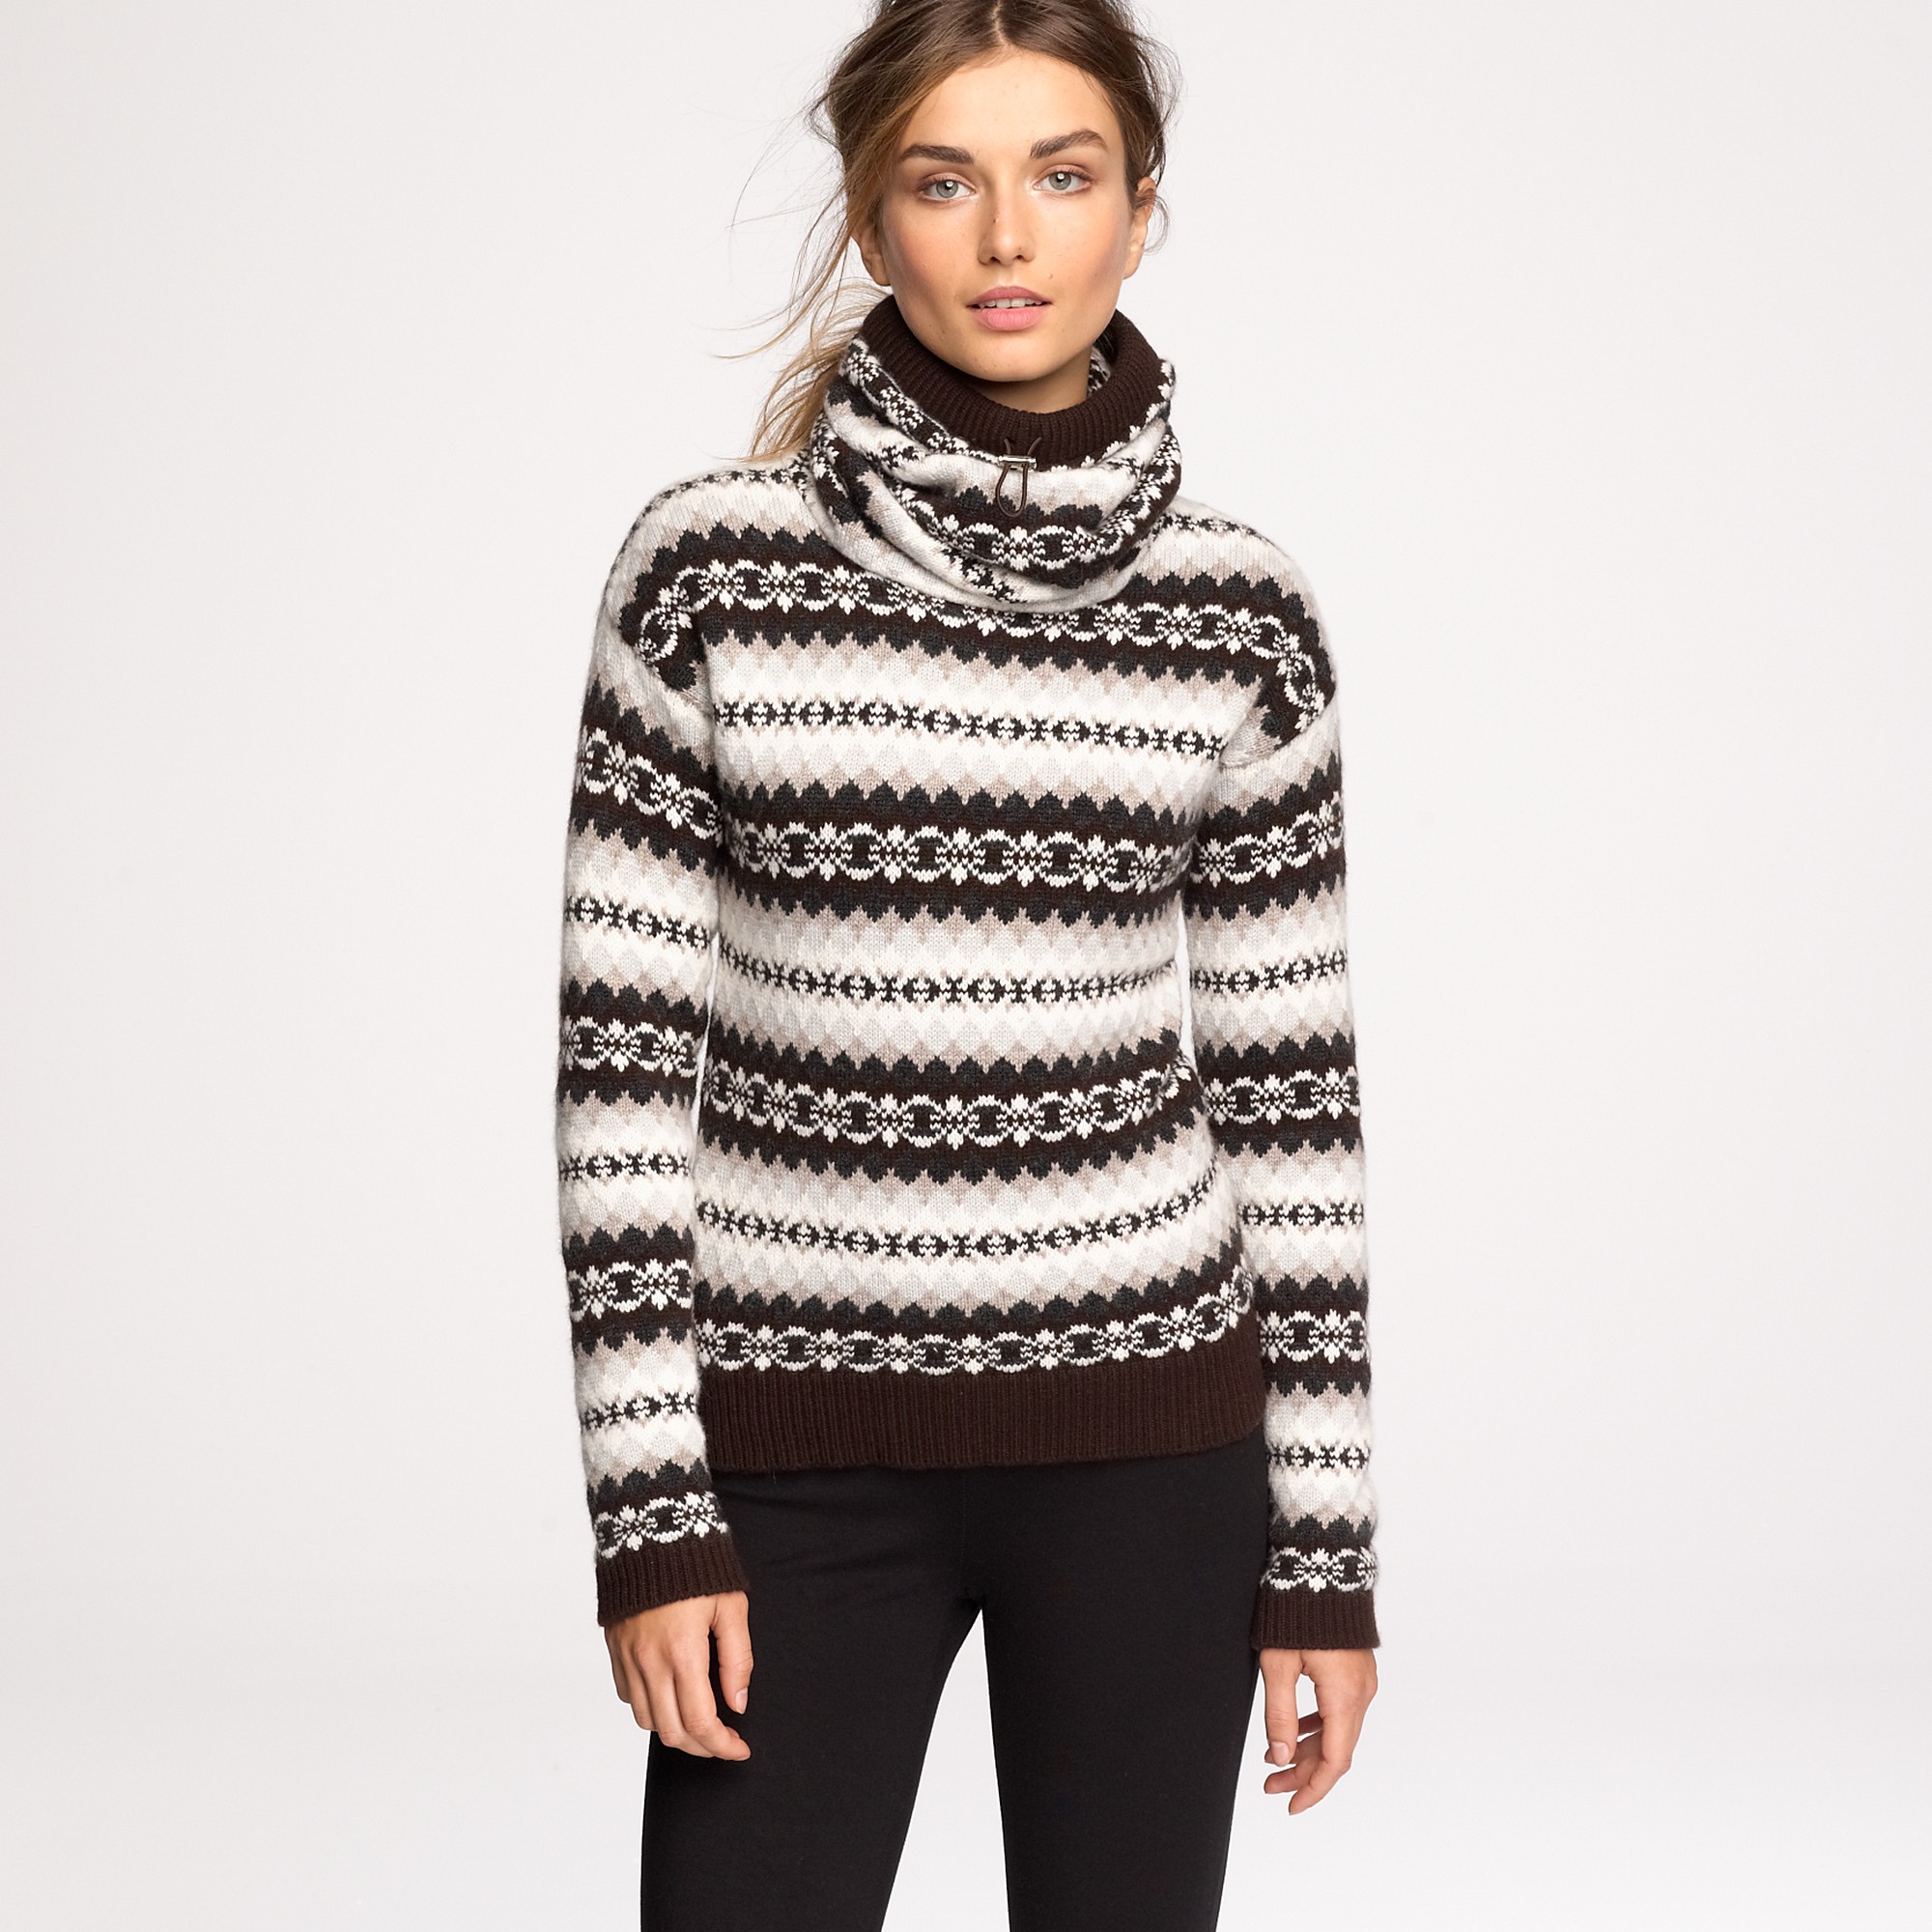 Buy > cashmere ski jumpers > in stock